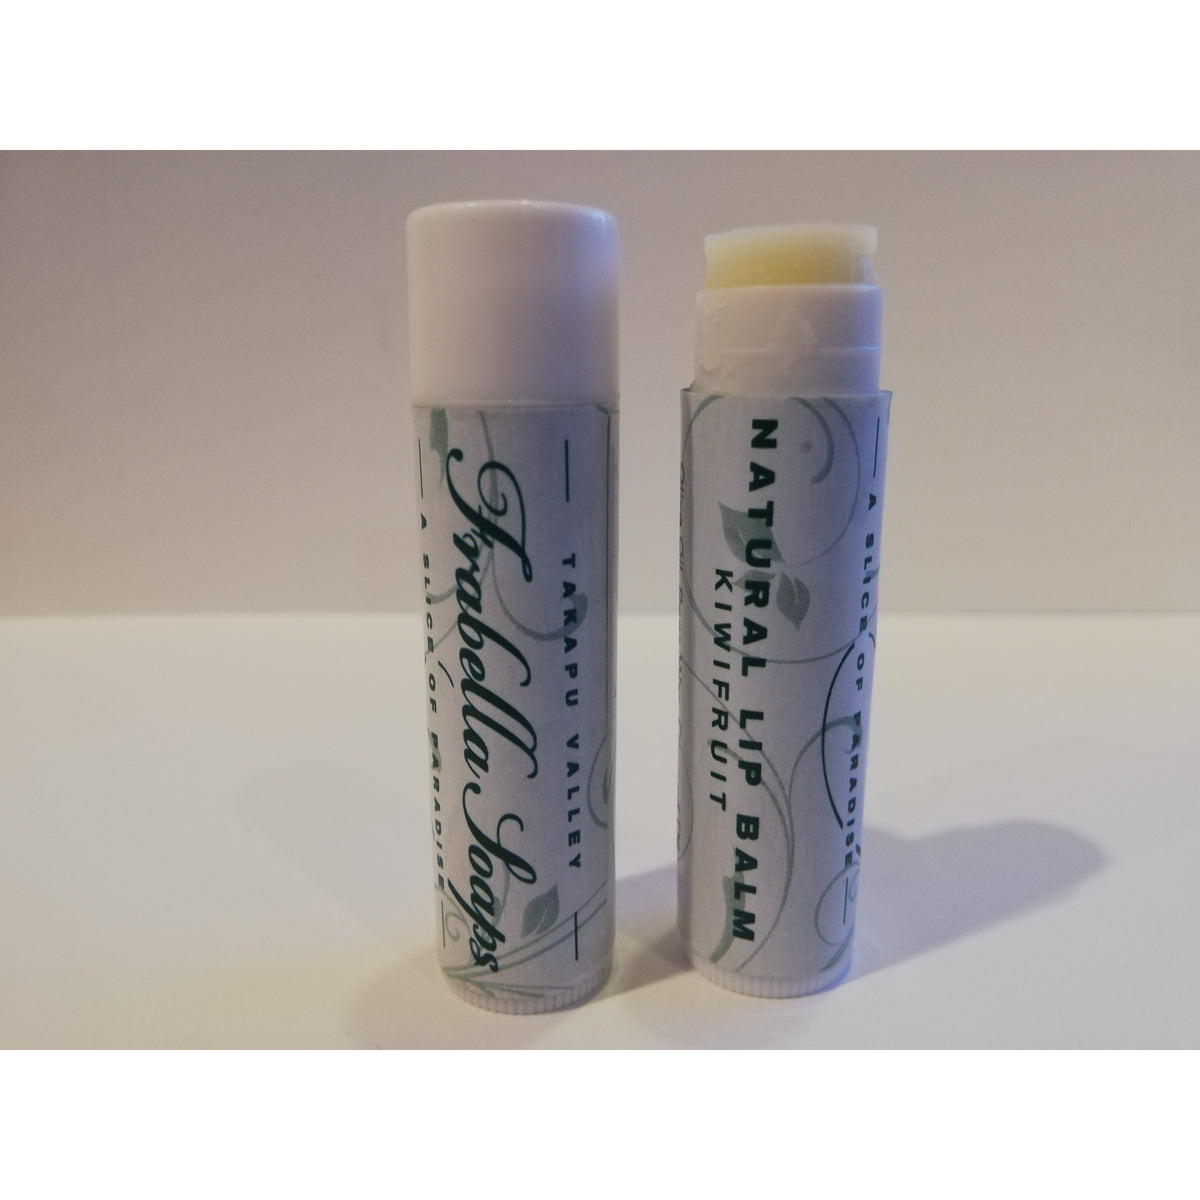 These 100% New Zealand Made beautiful natural lip balms make your lips smooth and soft.  Using only natural organic New Zealand Beeswax and only natural ingredients  It will leave your lips soft and sweet.